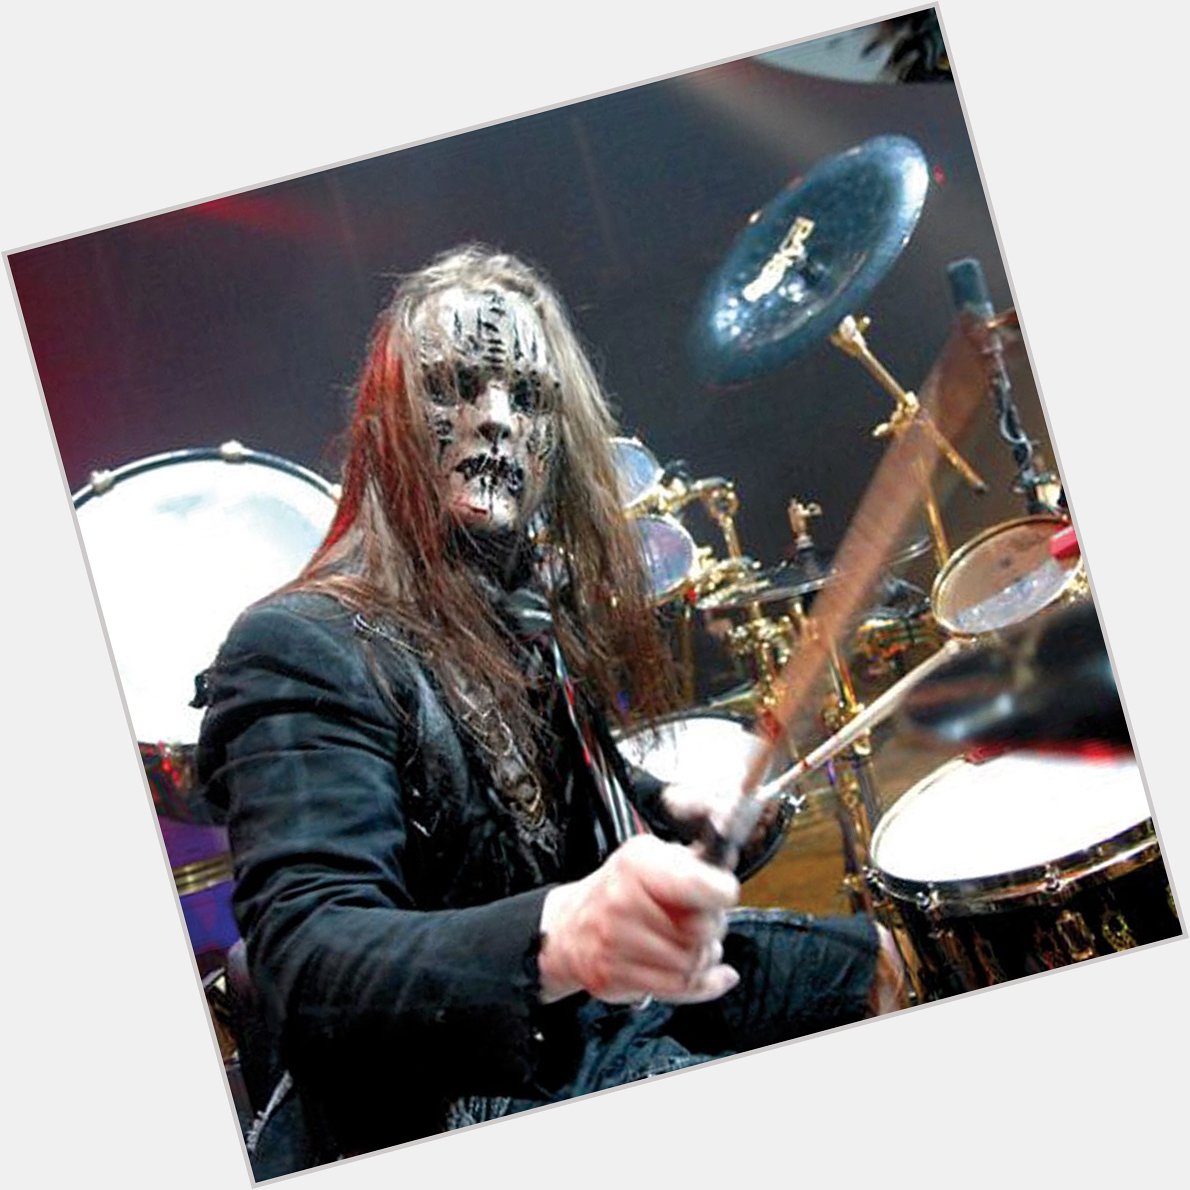 Happy birthday to the legendary Joey Jordison. 

Best known as the founding drummer of Slipknot! 